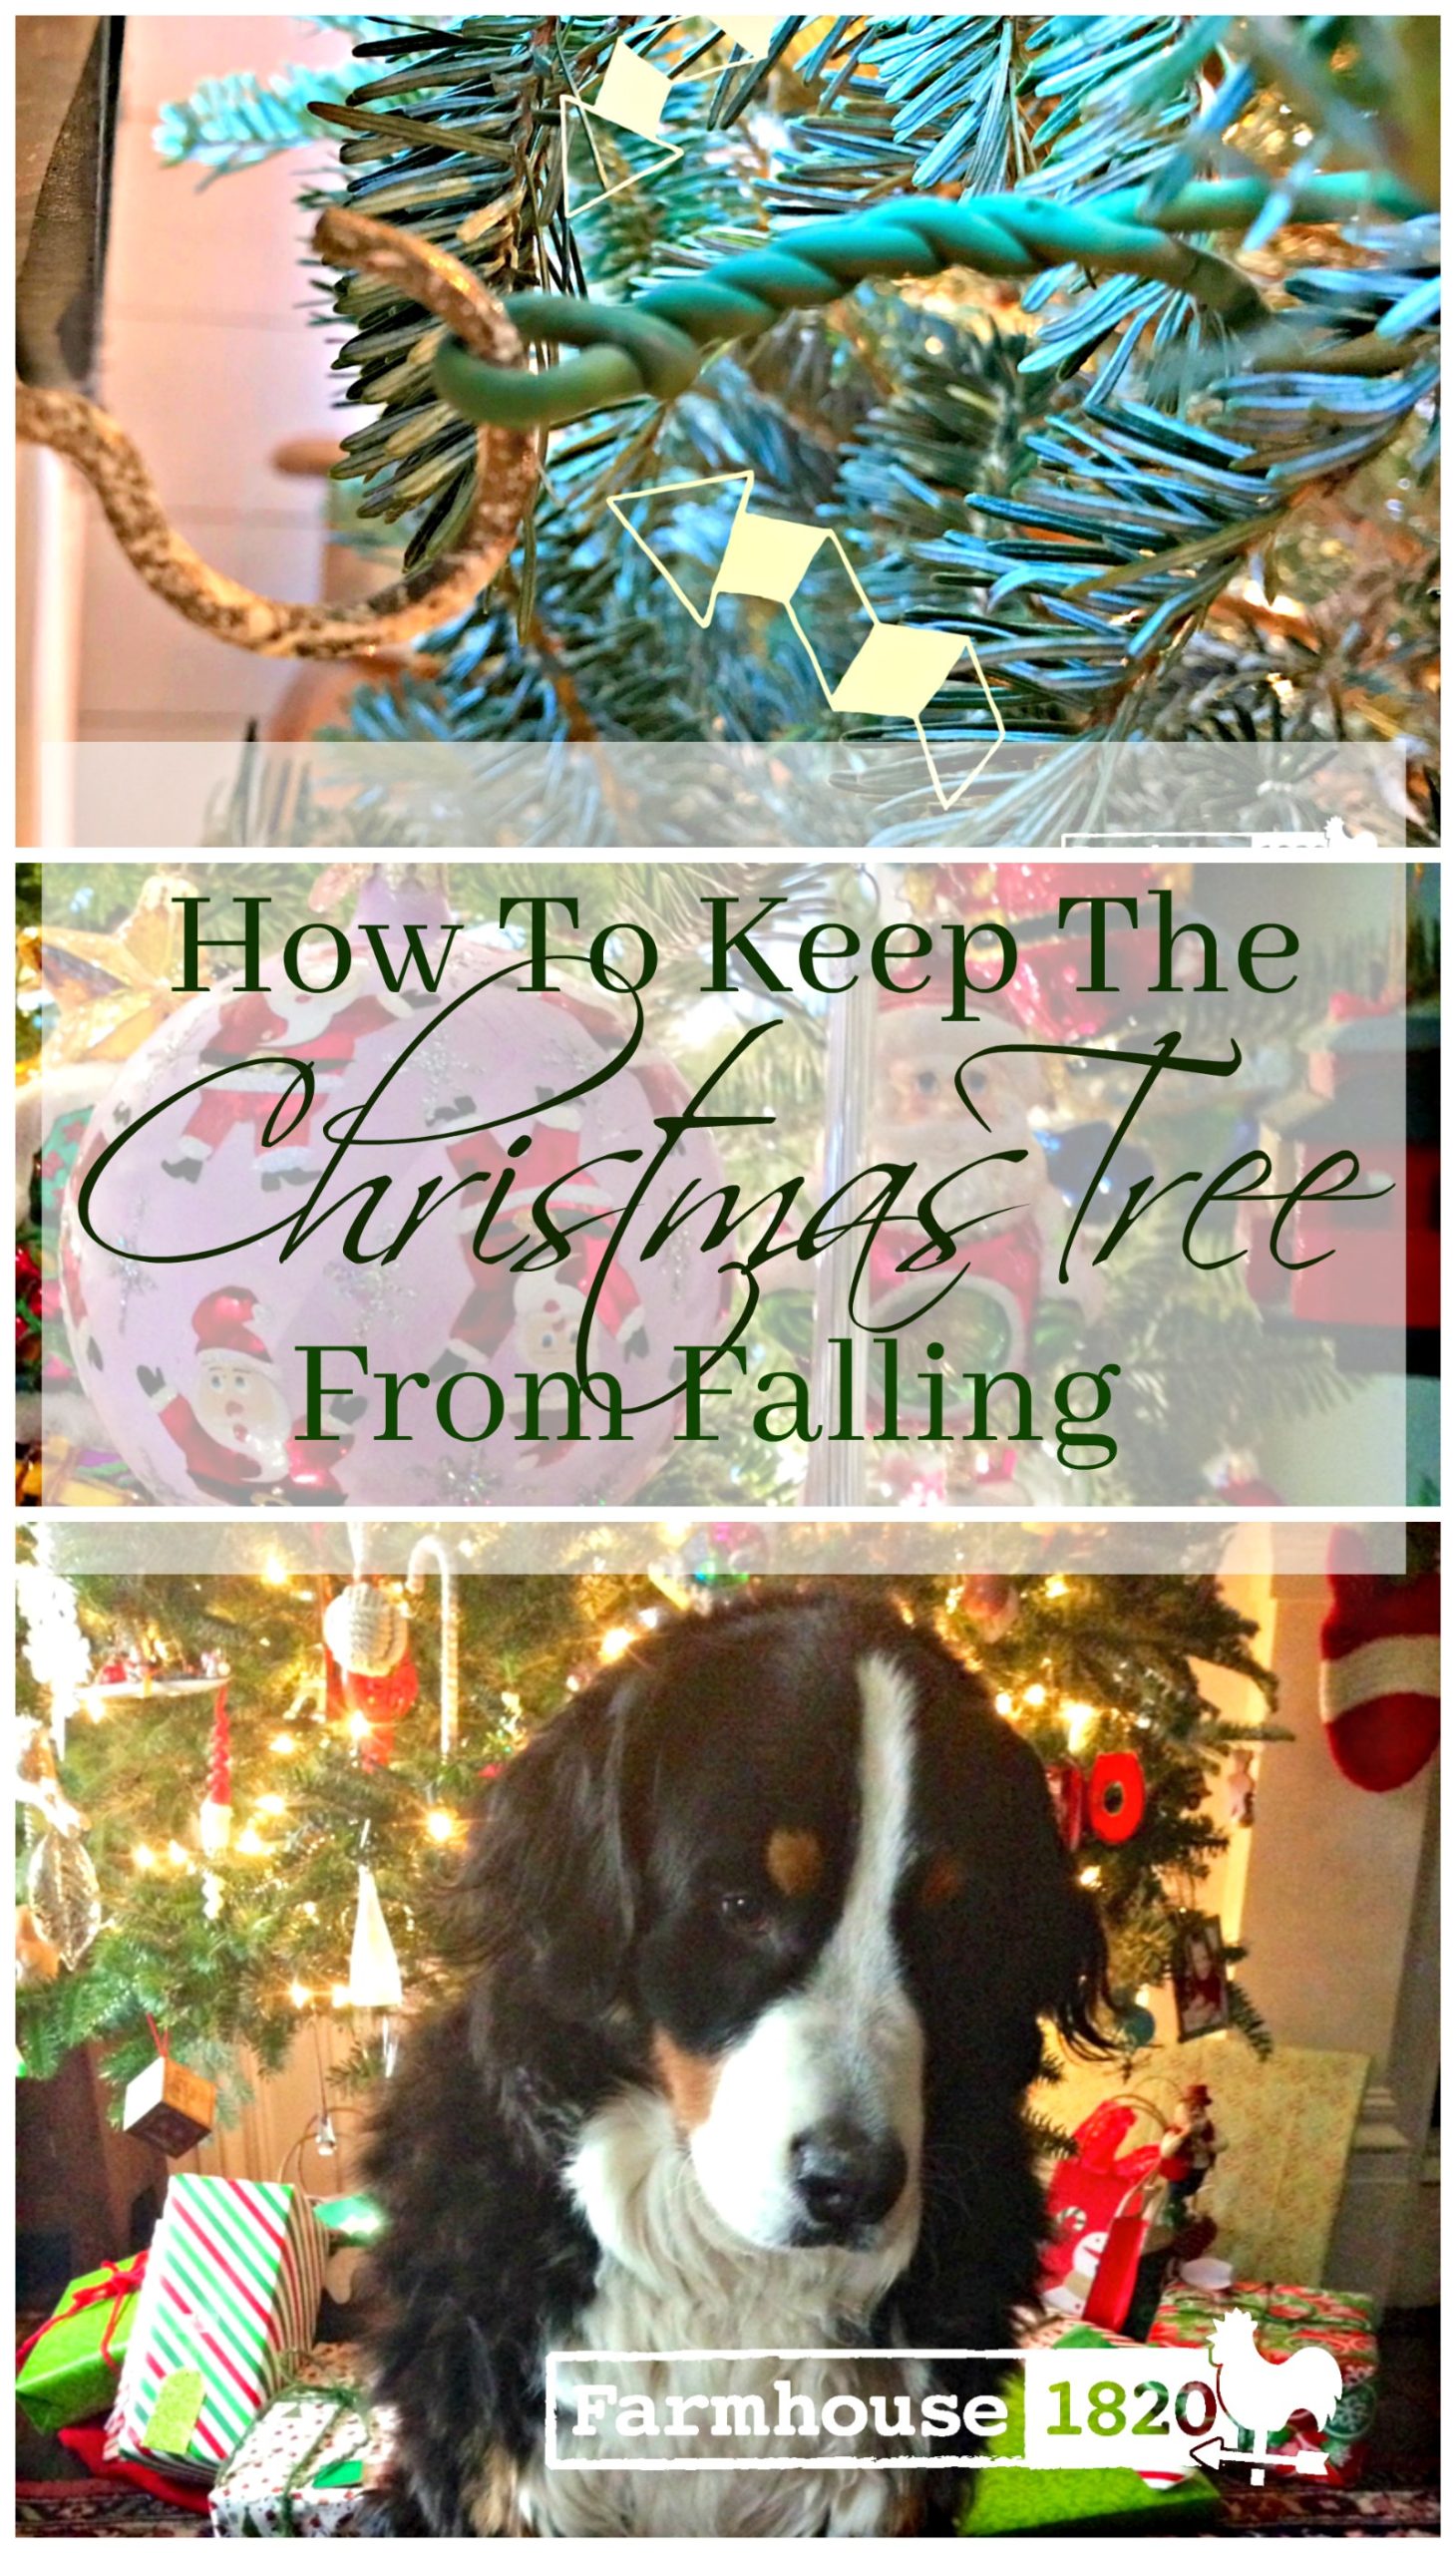 Christmas tree - how to keep the Christmas tree from falling